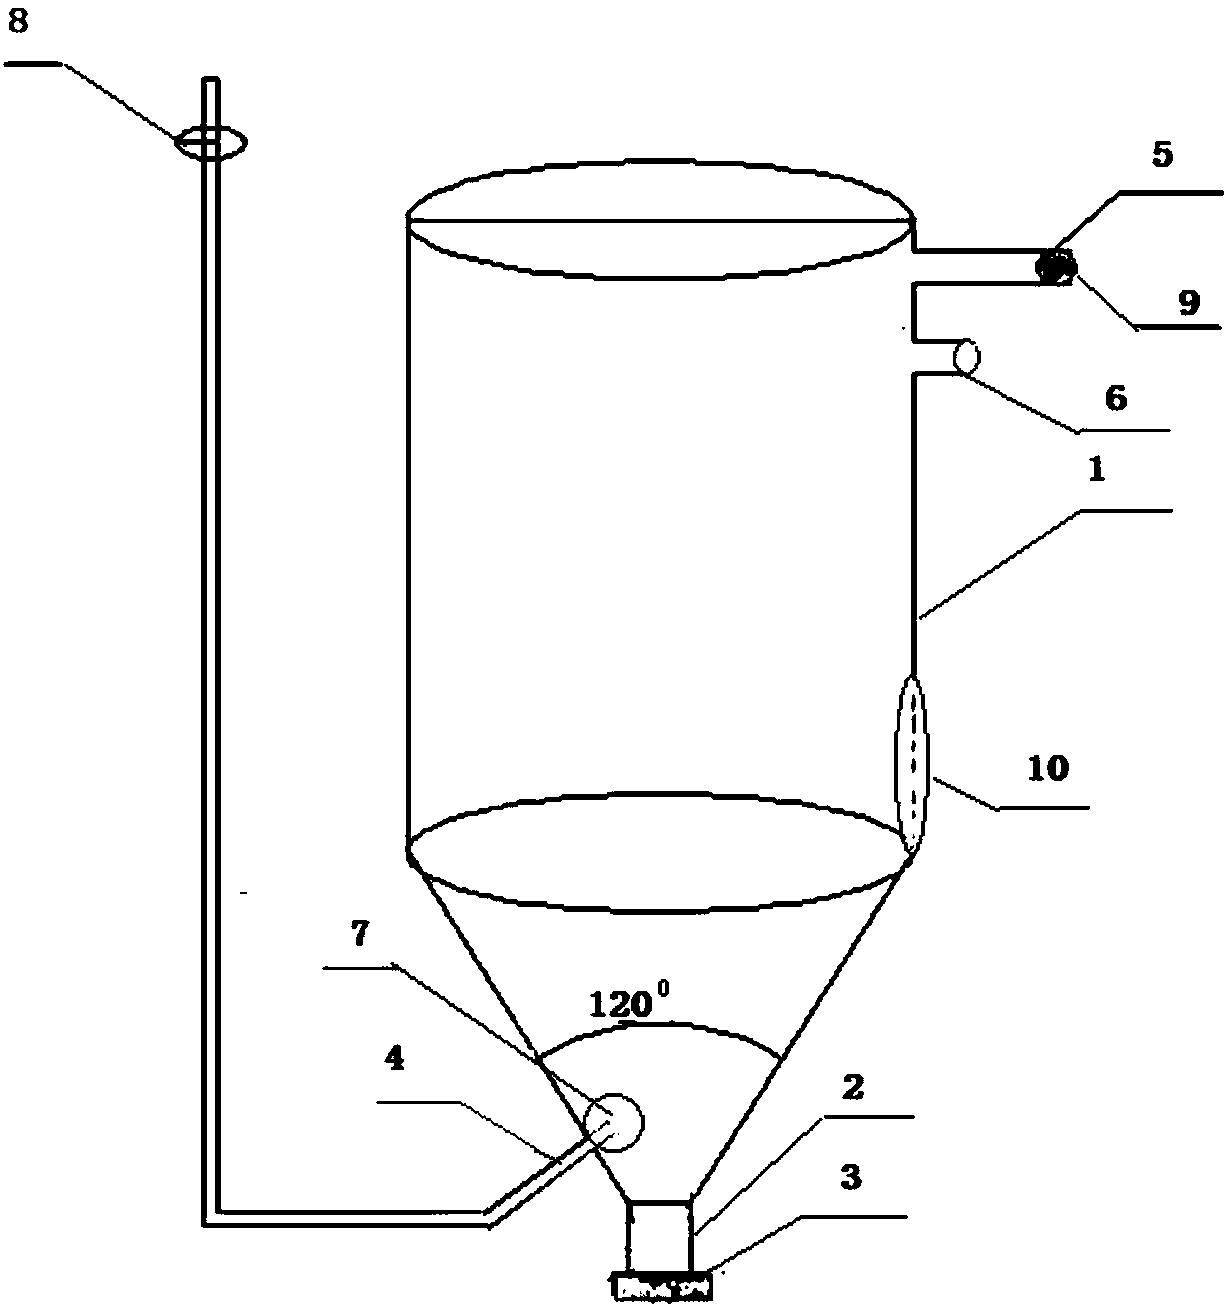 Liquid culture device for plant cells and organs